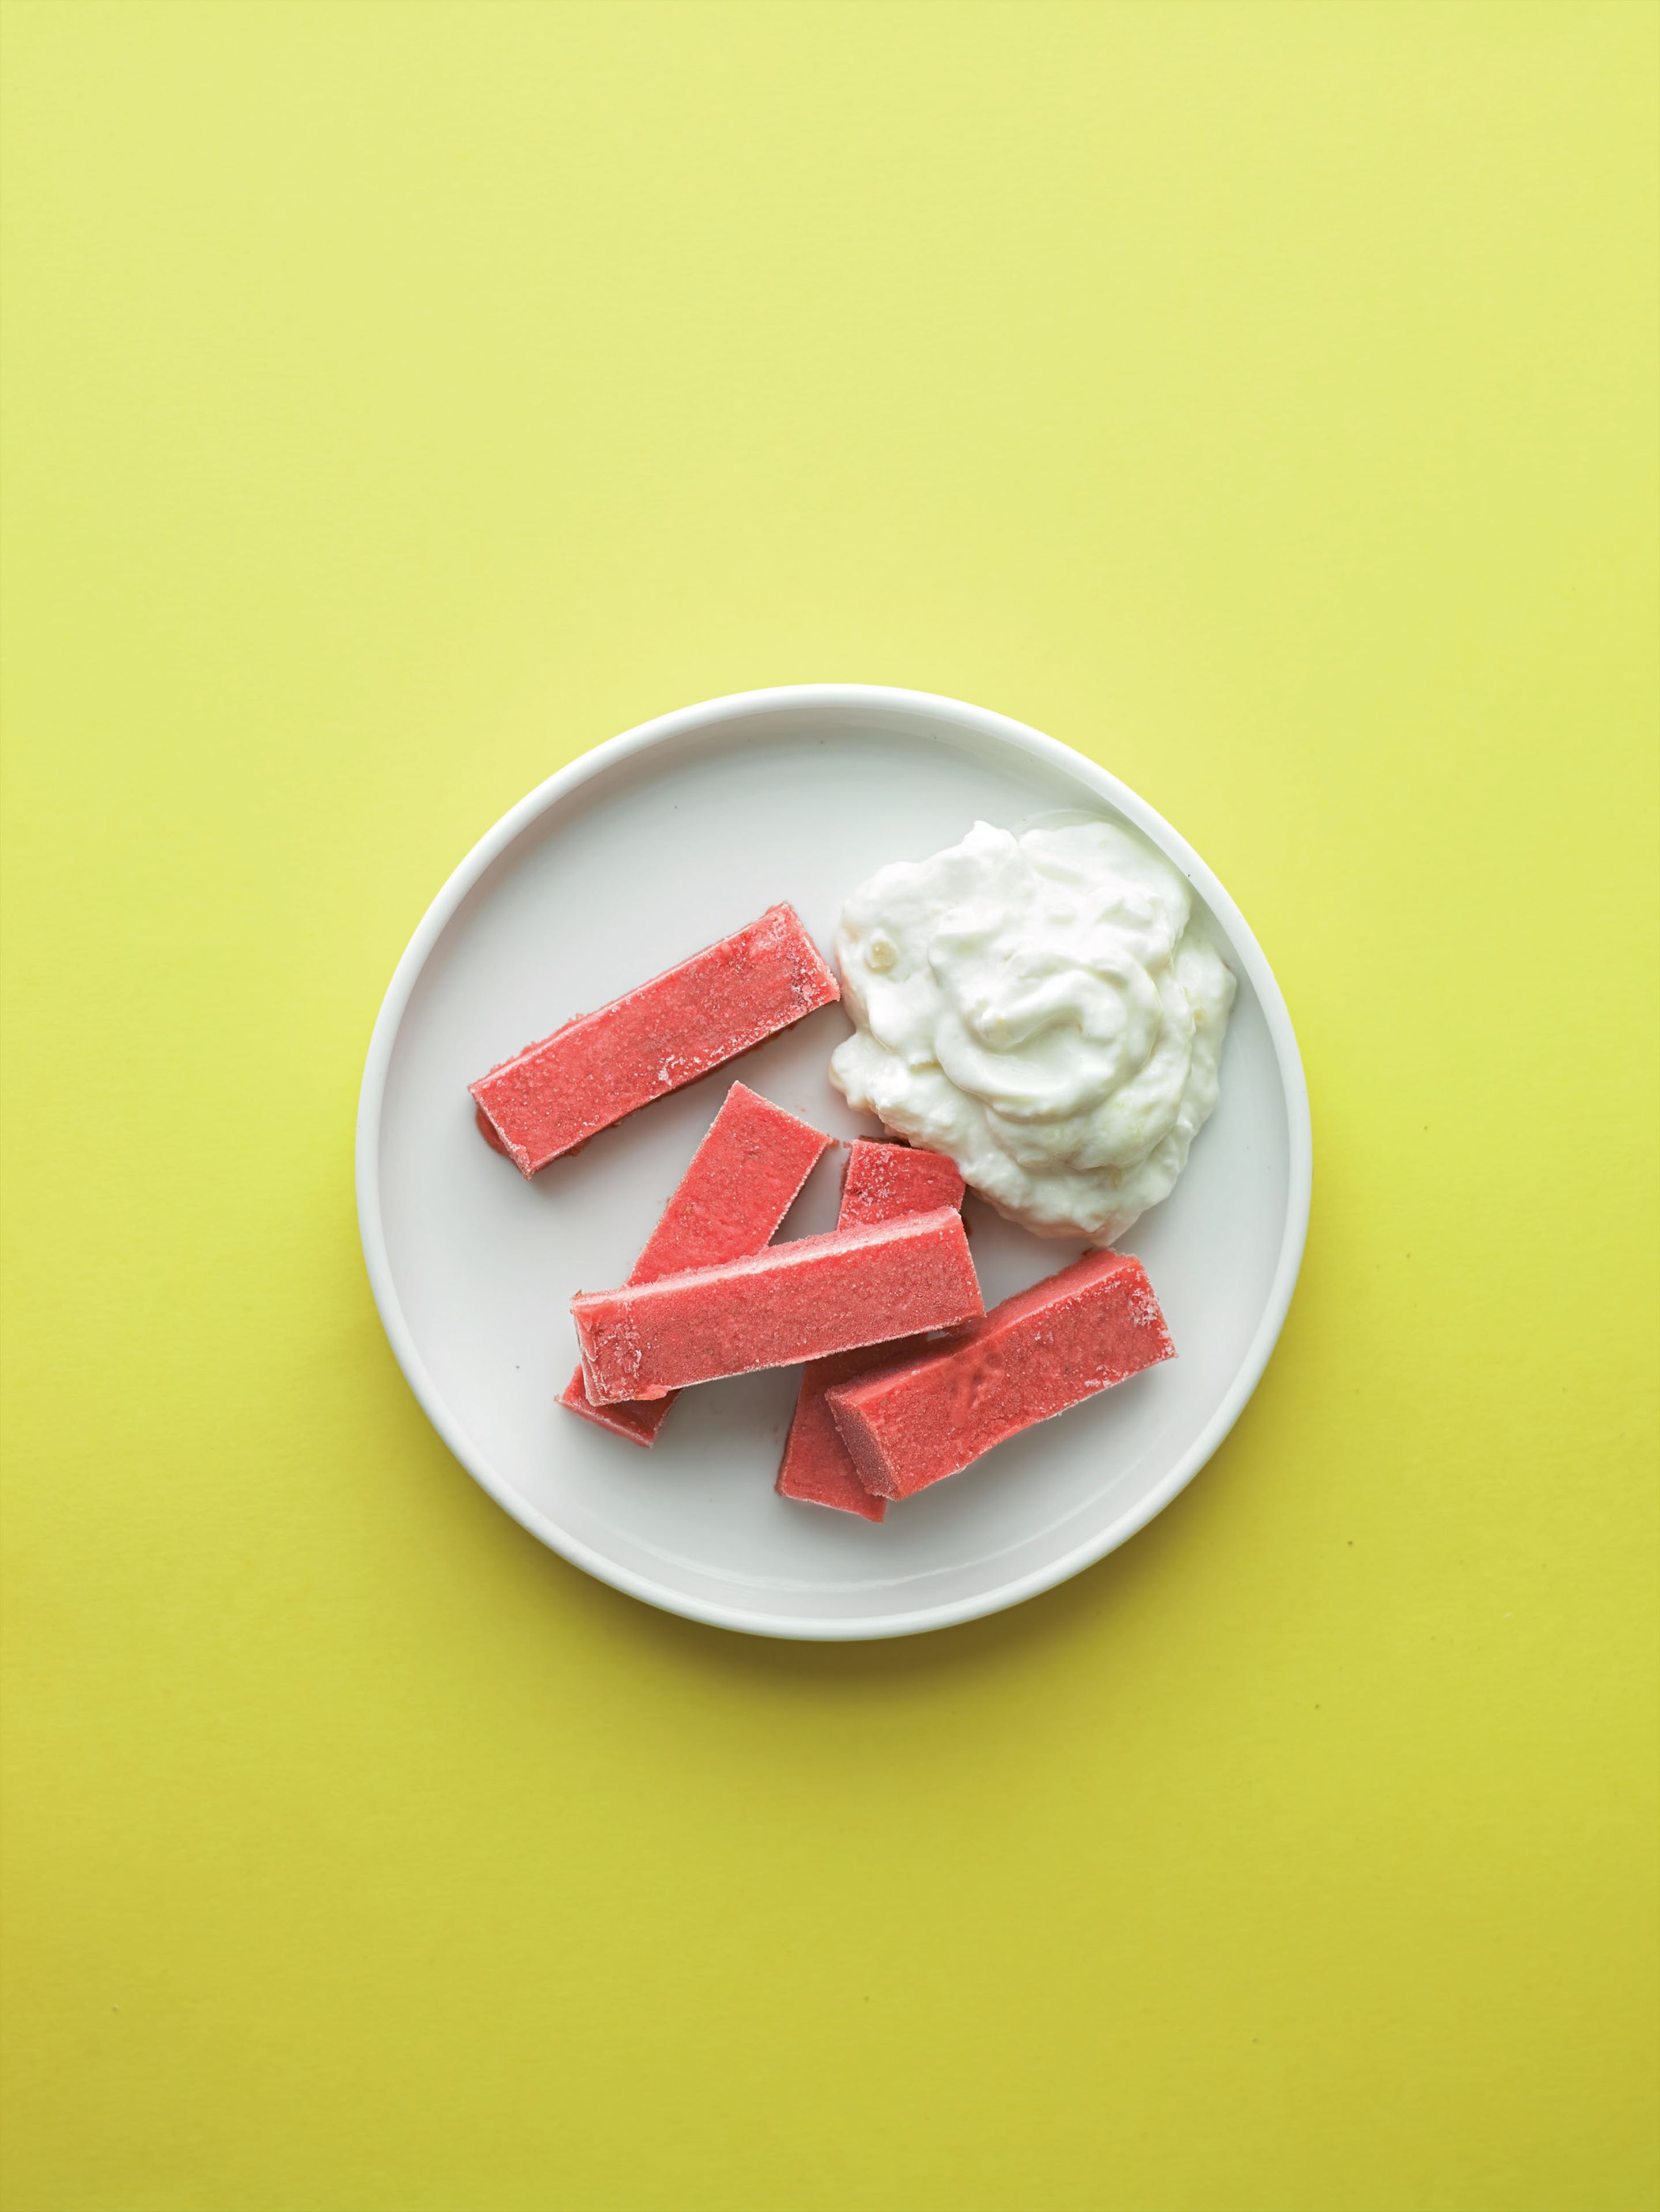 Rhubarb and strawberry sorbet with ginger cream